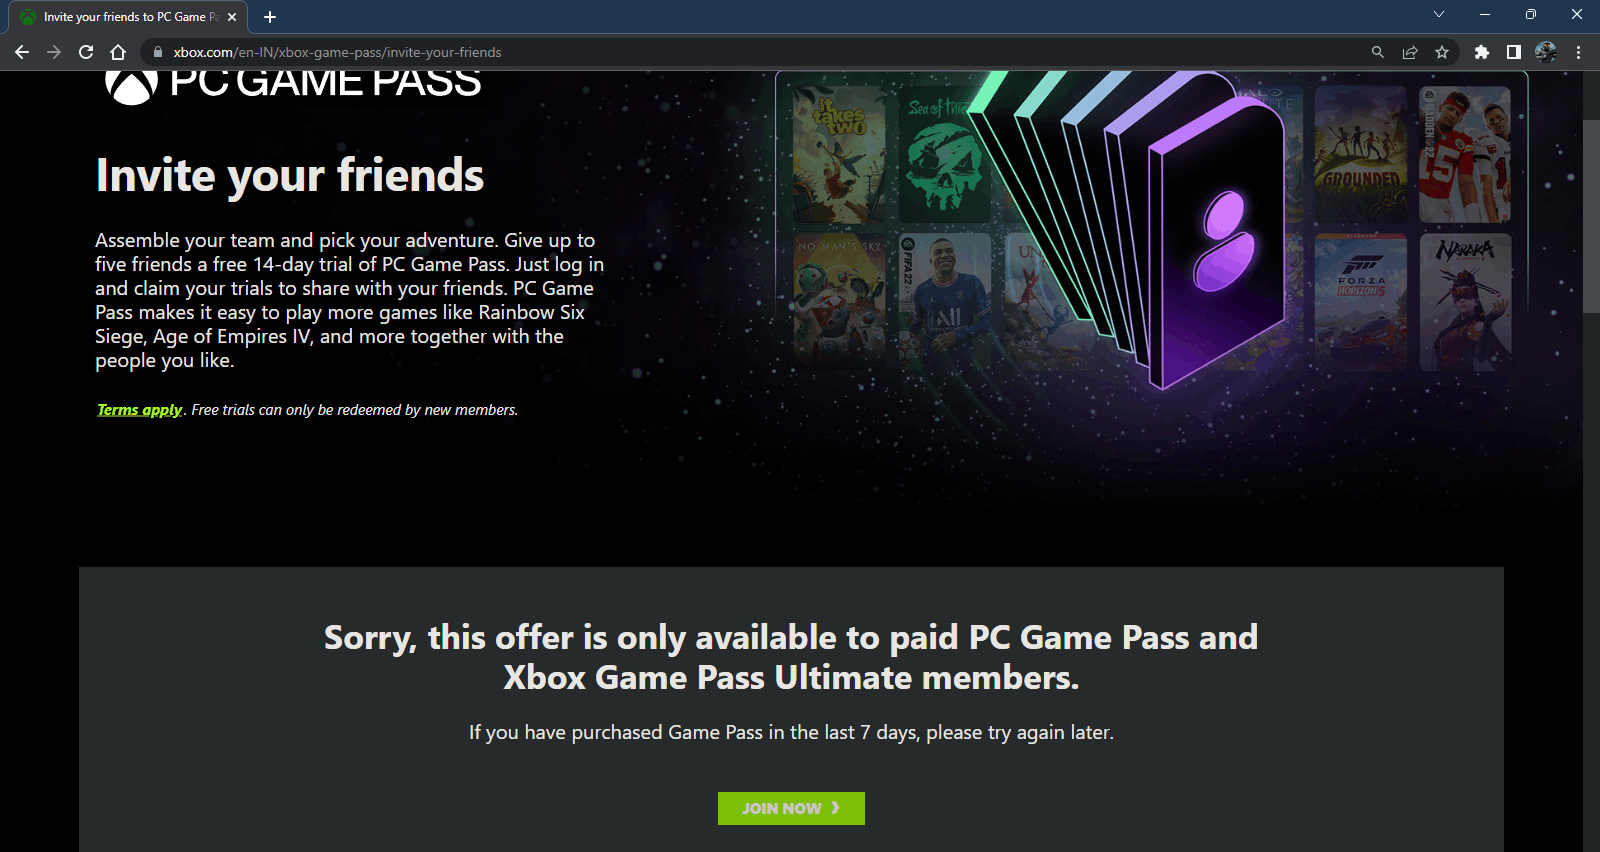 Microsoft confirms Xbox Game Pass Friends & Family plan, reveals